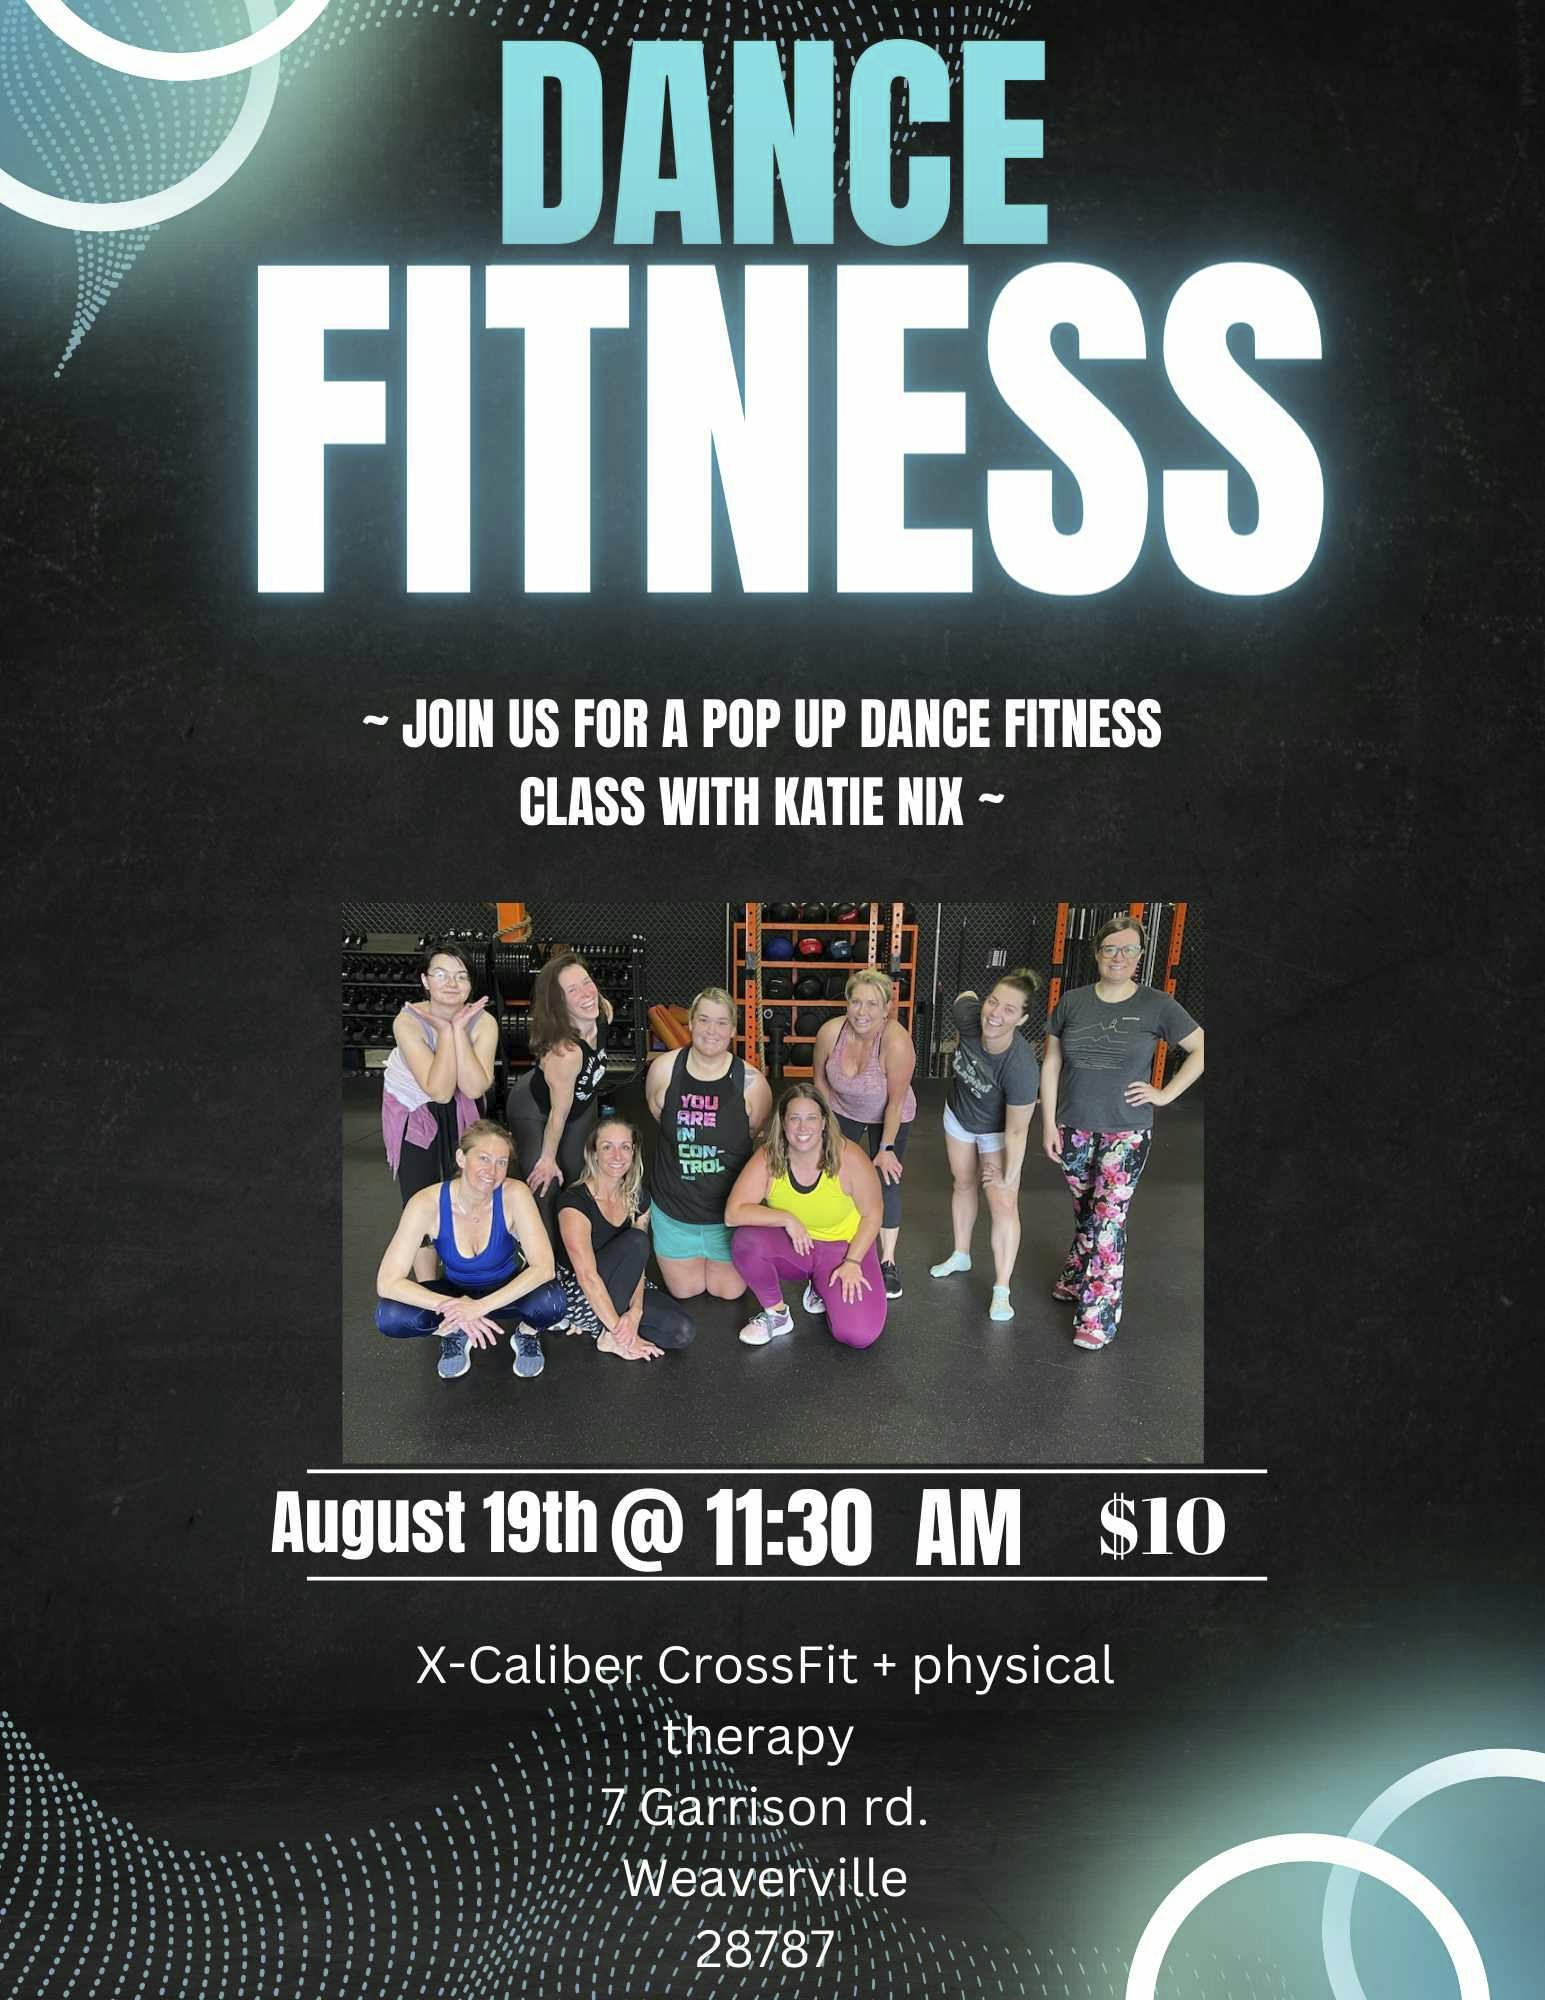 Dance Fitness | Join us for a pop up dance fitness class with Katie Nix | $10 | Aug 19th @ 11:30 AM | X-Caliber CrossFit + physical therapy | 7 Garrison Rd, Weaverville, NC 28787